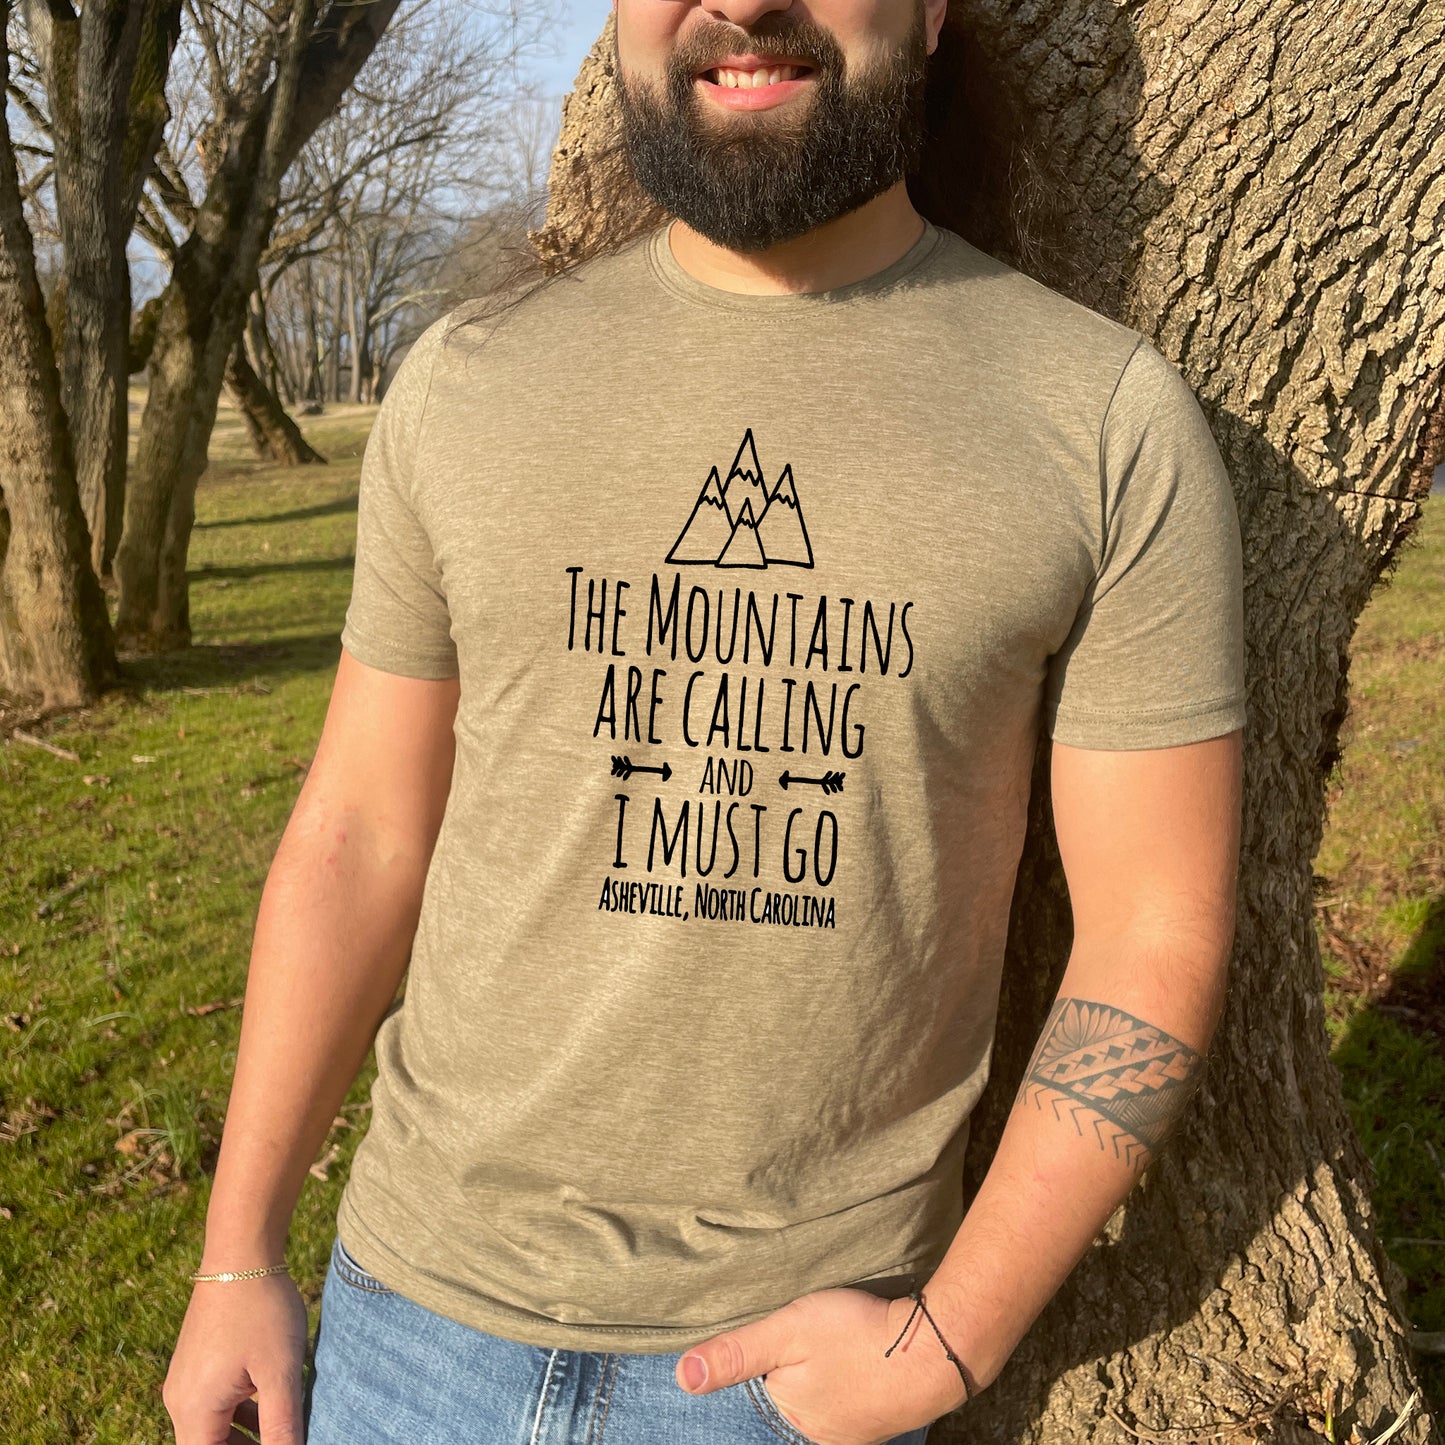 The Mountains Are Calling And I Must Go, Asheville North Carolina - Men's / Unisex Tee - Stonewash Blue or Sage